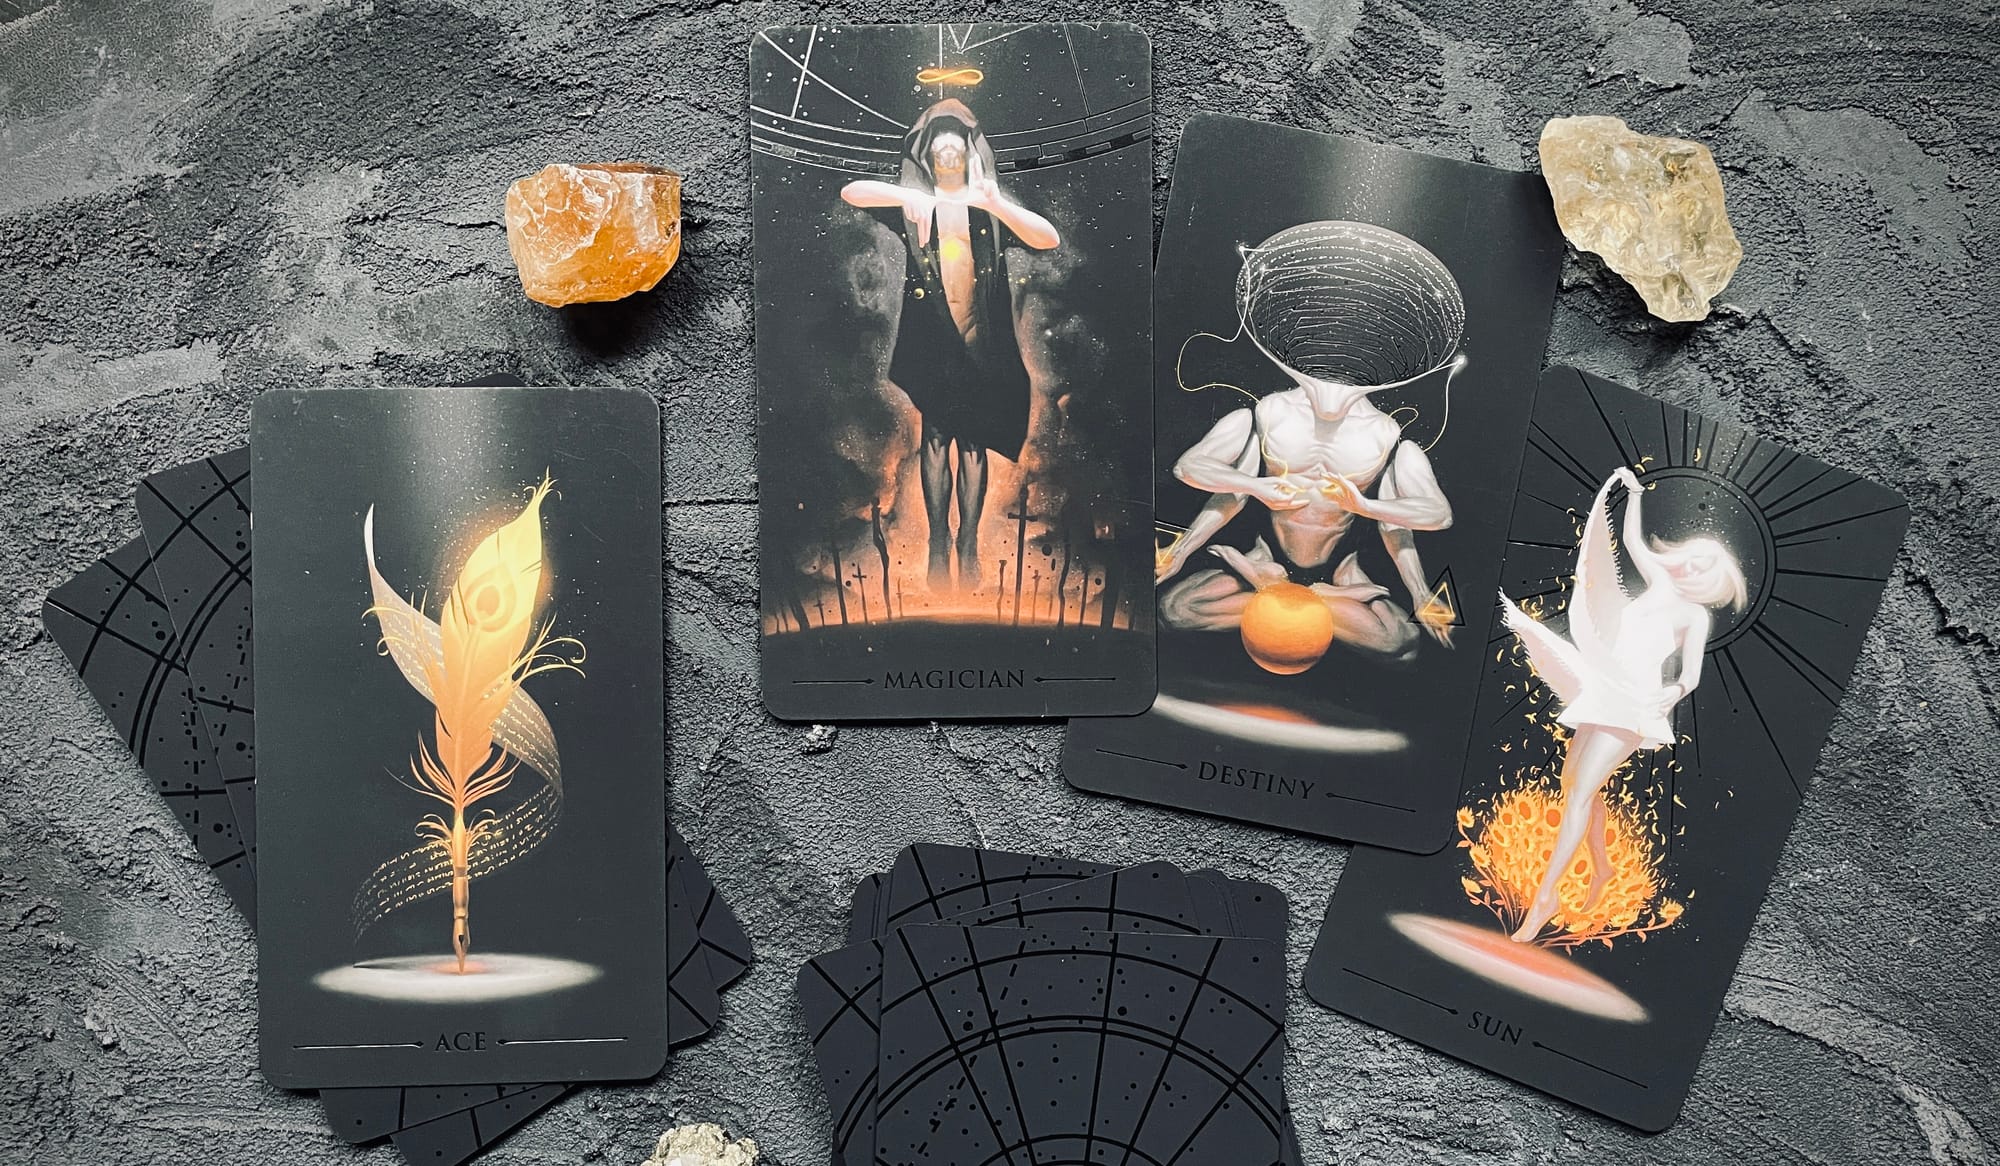 ace of wands, magician, destiny (wheel of fortune) and sun from the true black tarot